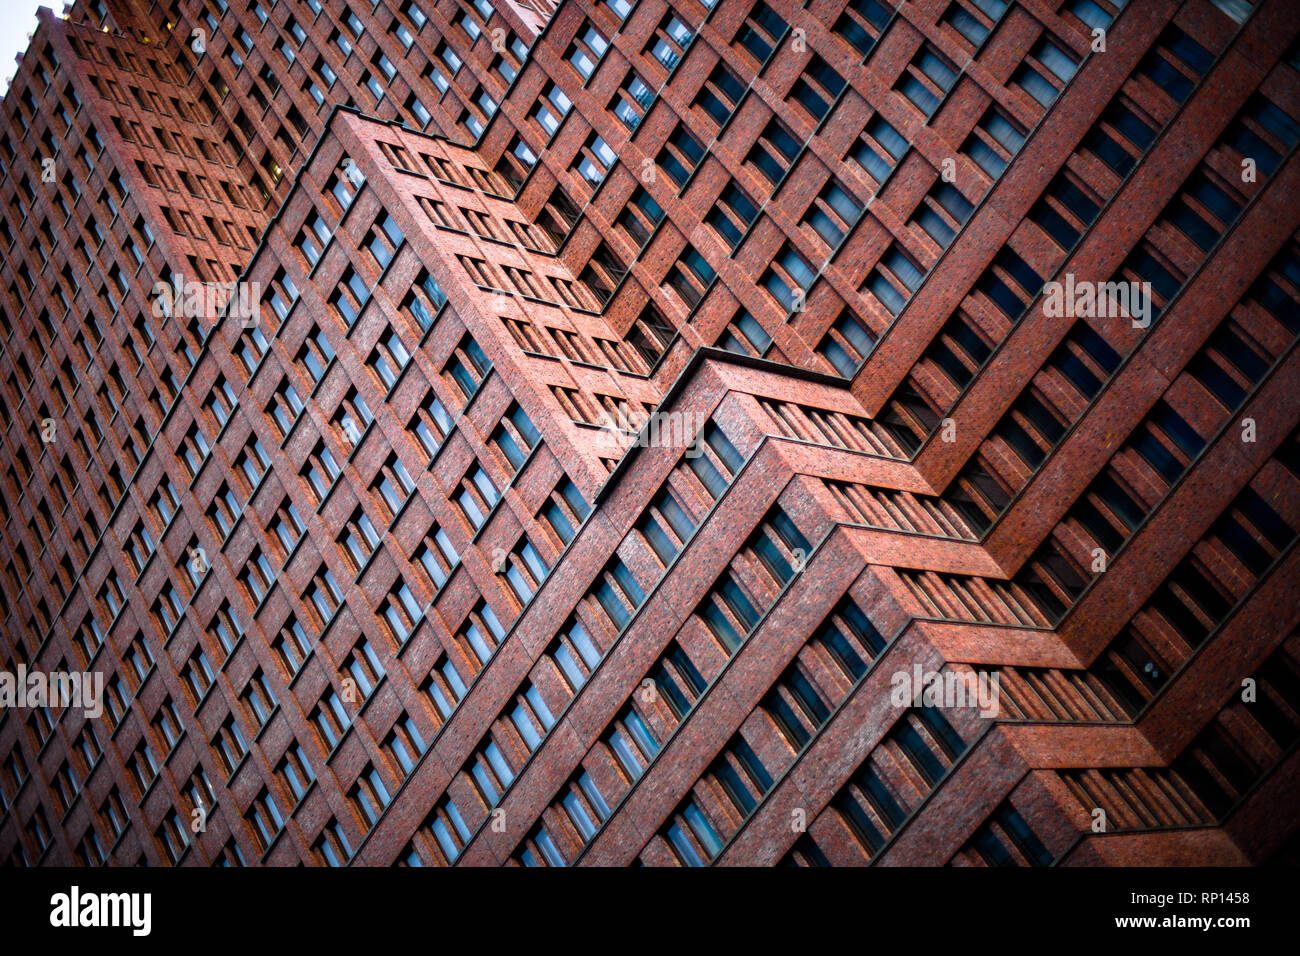 Abstract building Stock Photo